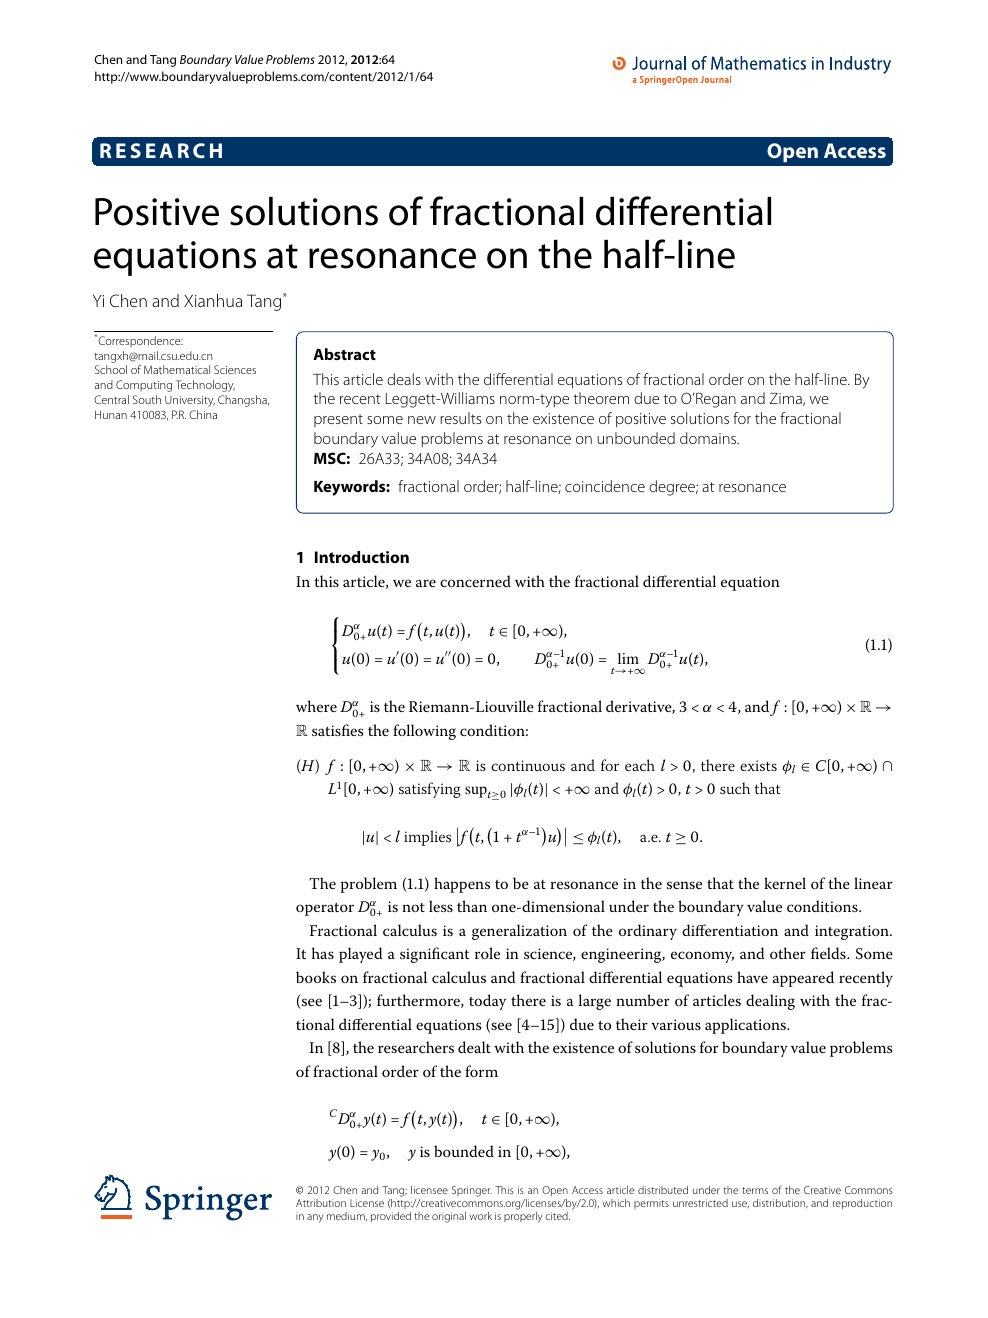 Positive Solutions Of Fractional Differential Equations At Resonance On The Half Line Topic Of Research Paper In Mathematics Download Scholarly Article Pdf And Read For Free On Cyberleninka Open Science Hub